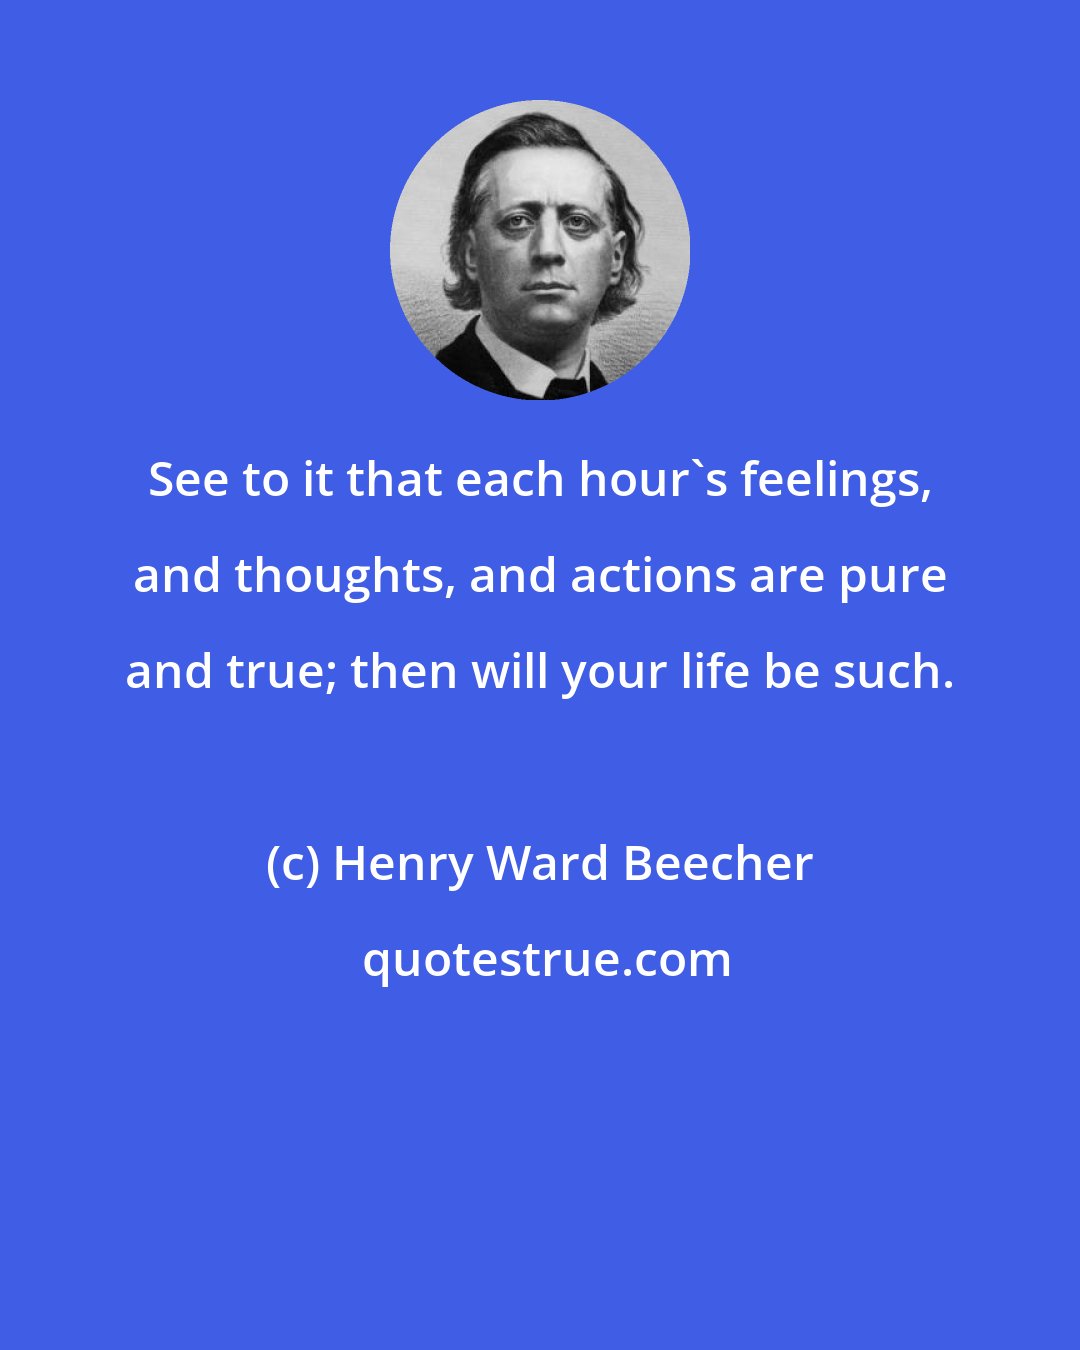 Henry Ward Beecher: See to it that each hour's feelings, and thoughts, and actions are pure and true; then will your life be such.